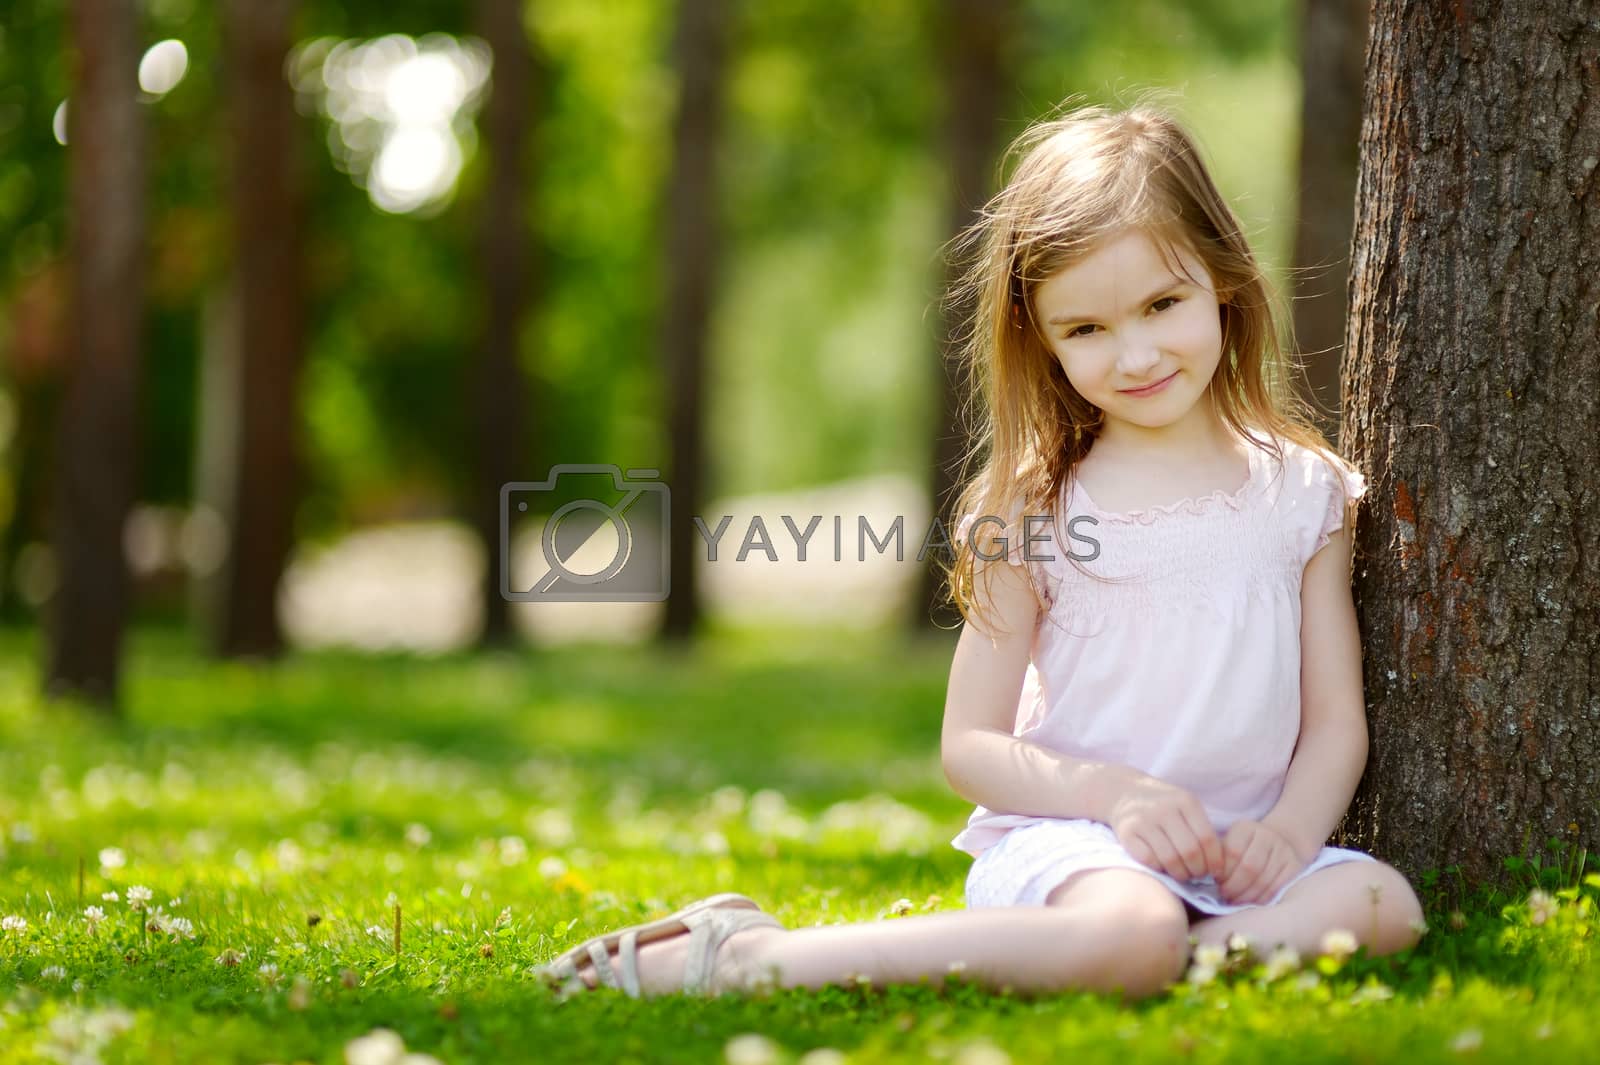 Royalty free image of Cute little girl sitting on a clover field by maximkabb